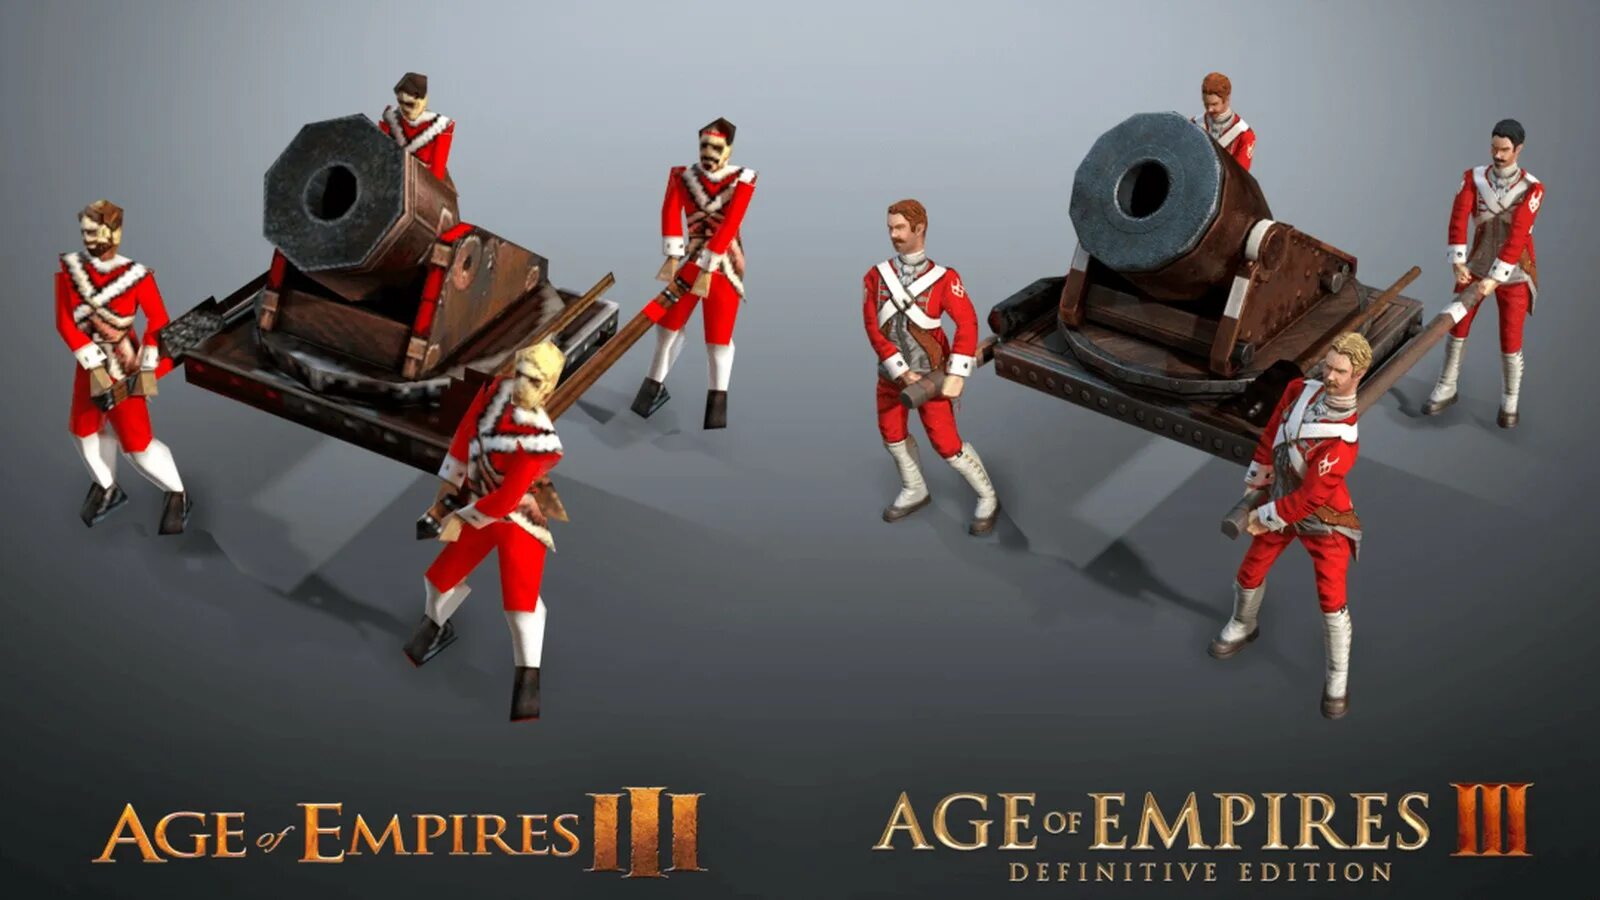 Age pf. Age of Empires 3 ремастер. Age of Empires 3 Definitive. Age of Empires III: Definitive Edition. AOE 3 Definitive Edition.